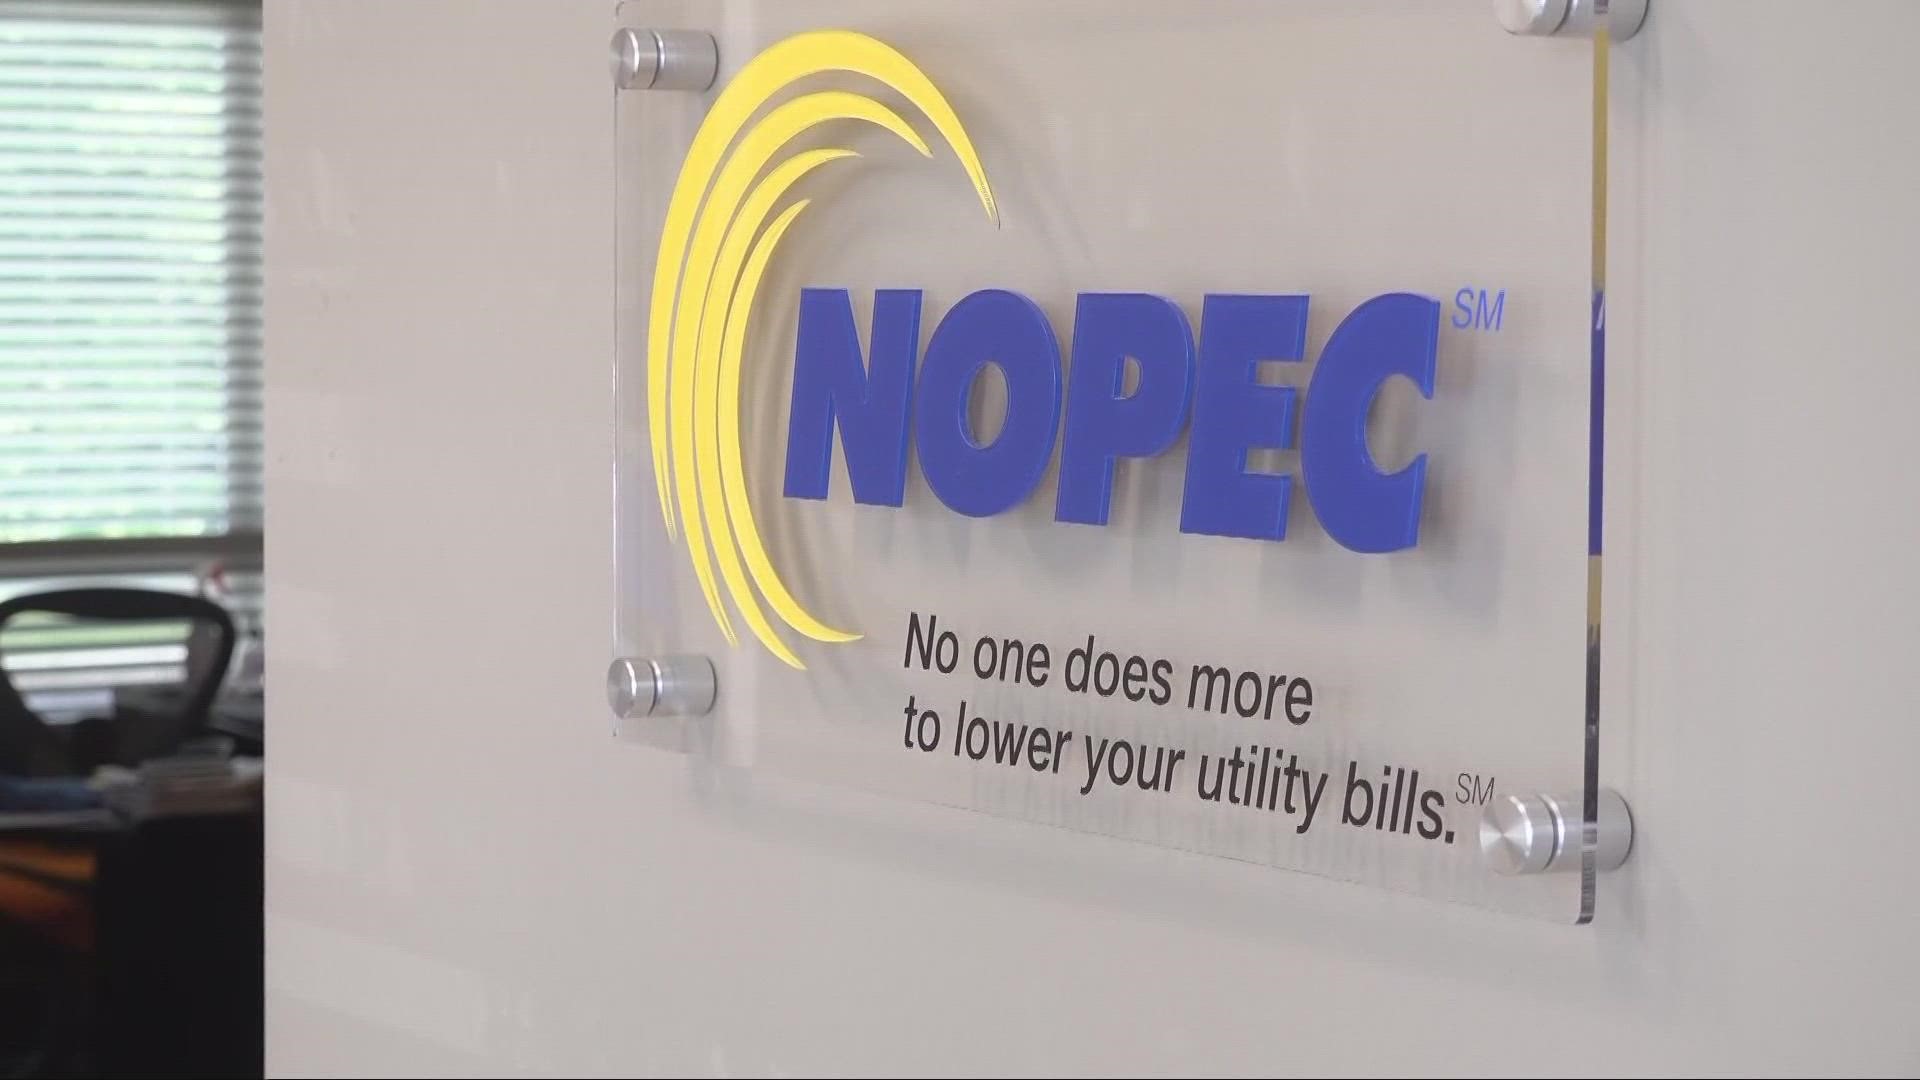 Community leaders questioned NOPEC after their customers' energy bills doubled over summer